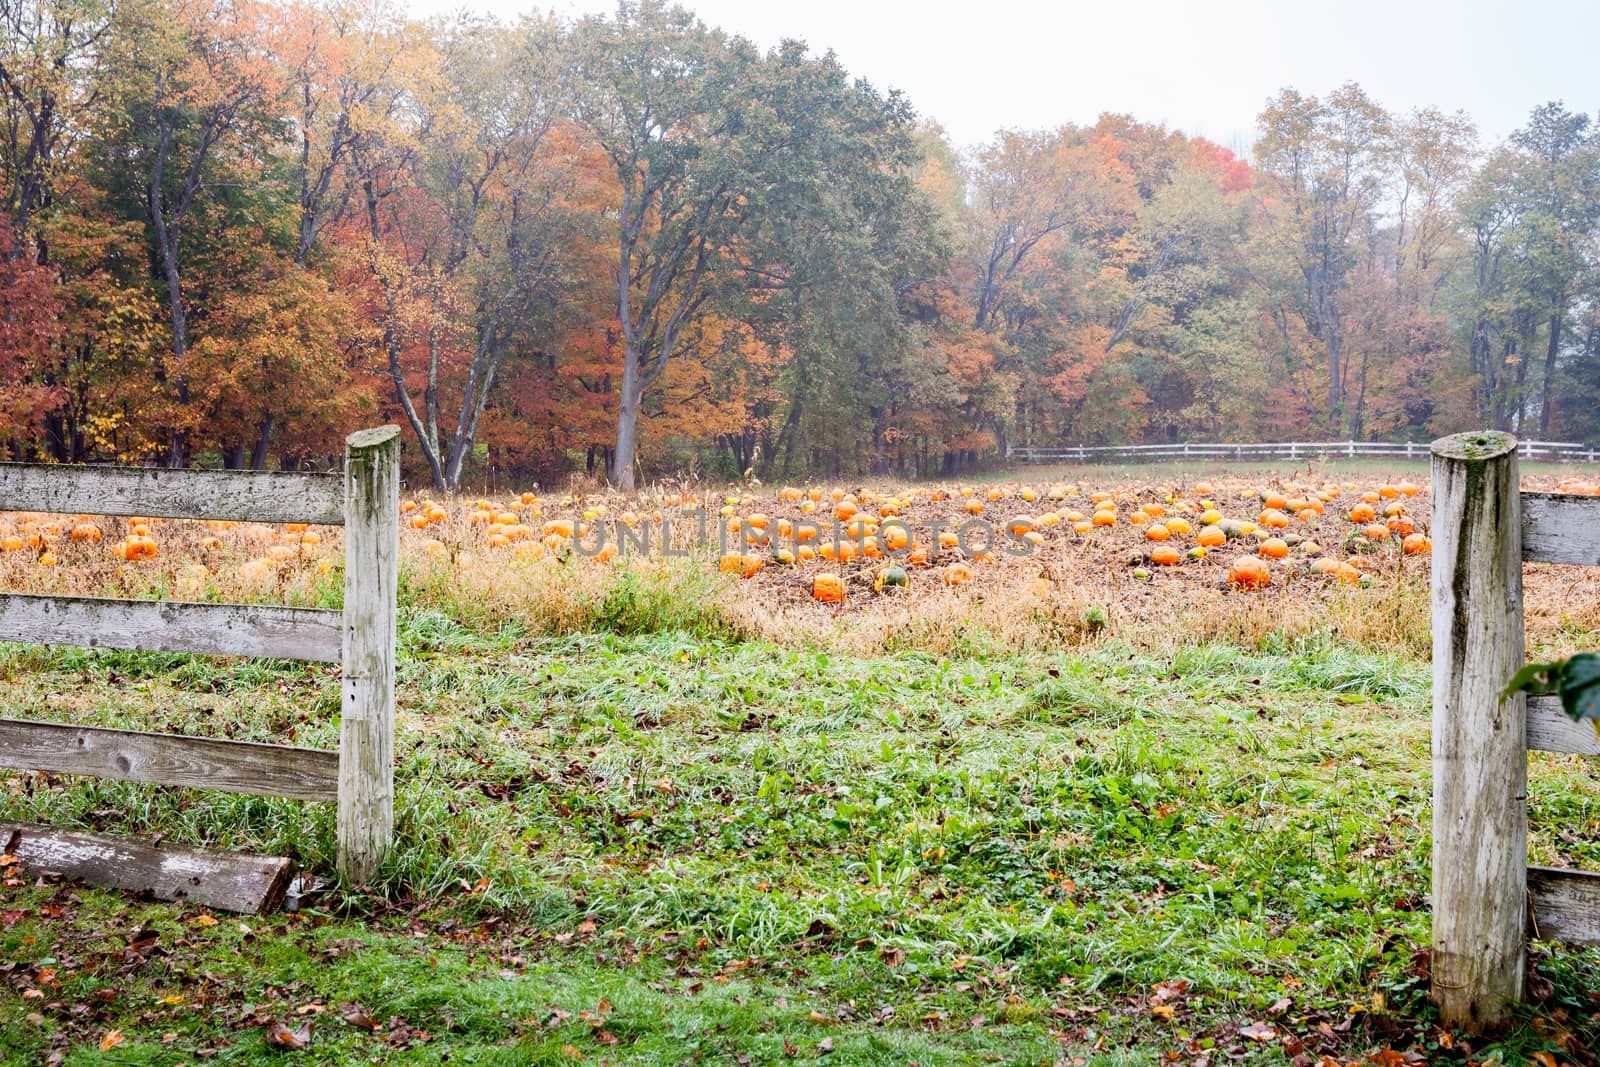 Field of ready to pick pumkins through wooden fence on misty damp autumn day in New England.